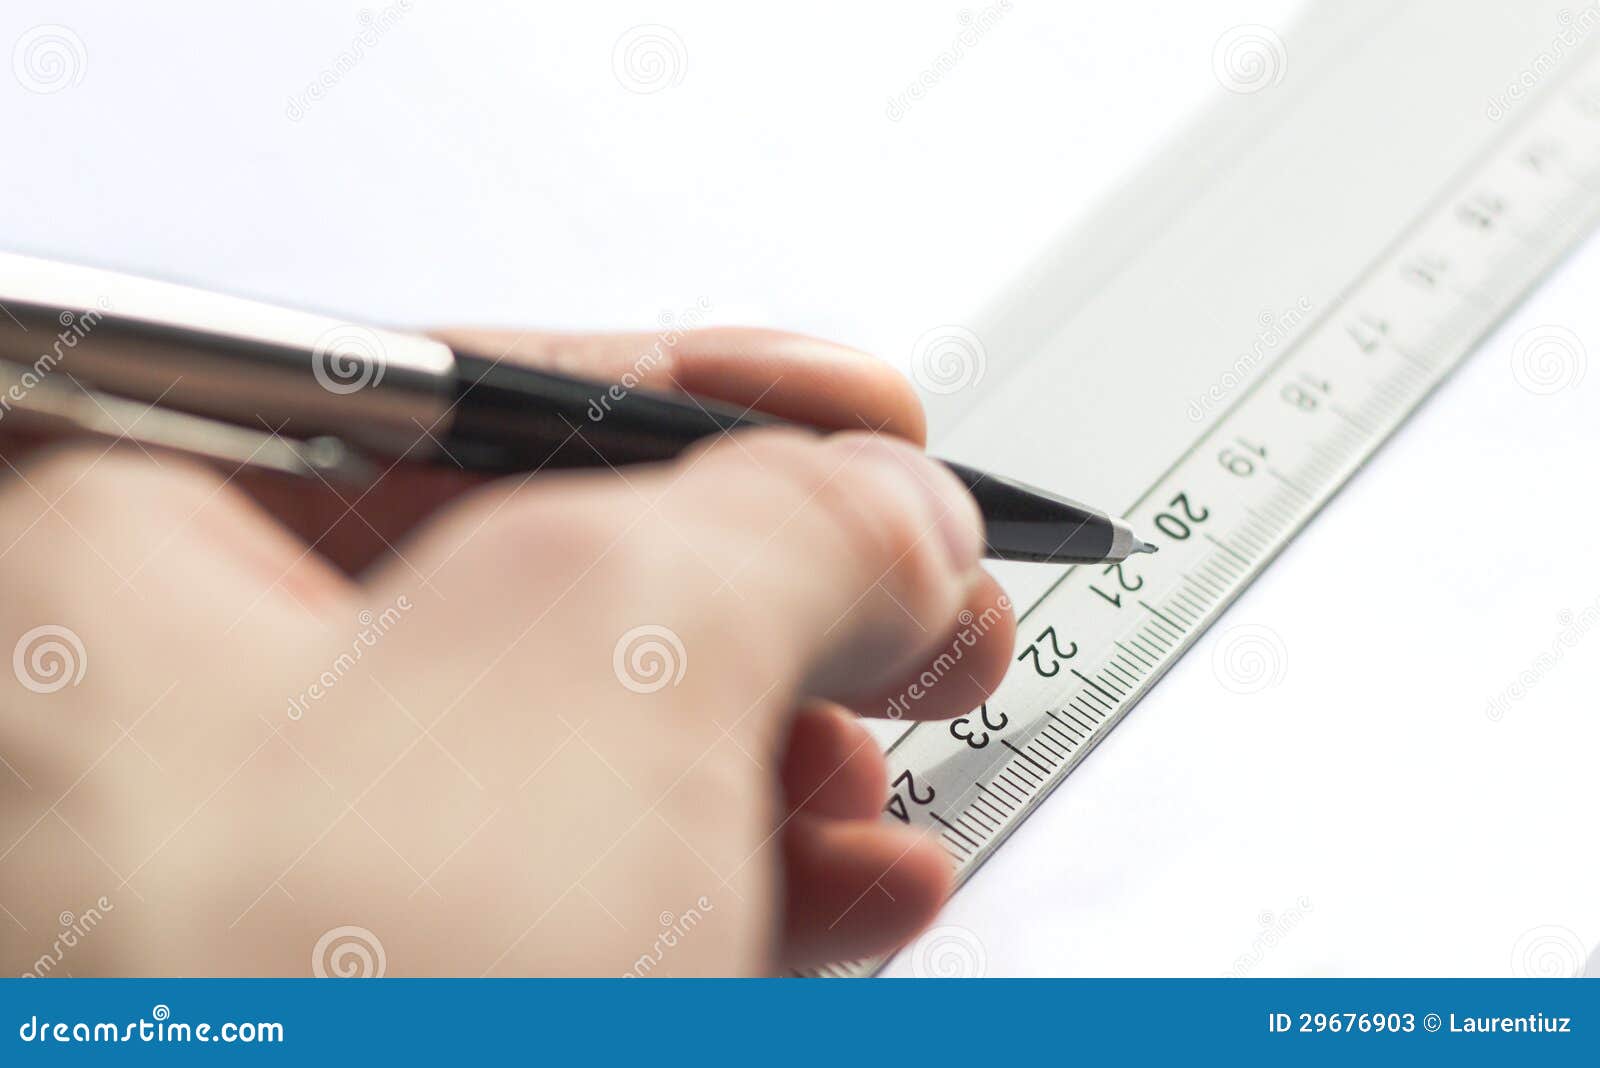 Drawing by a Ruler with Hand Stock Image - Image of assess, artist